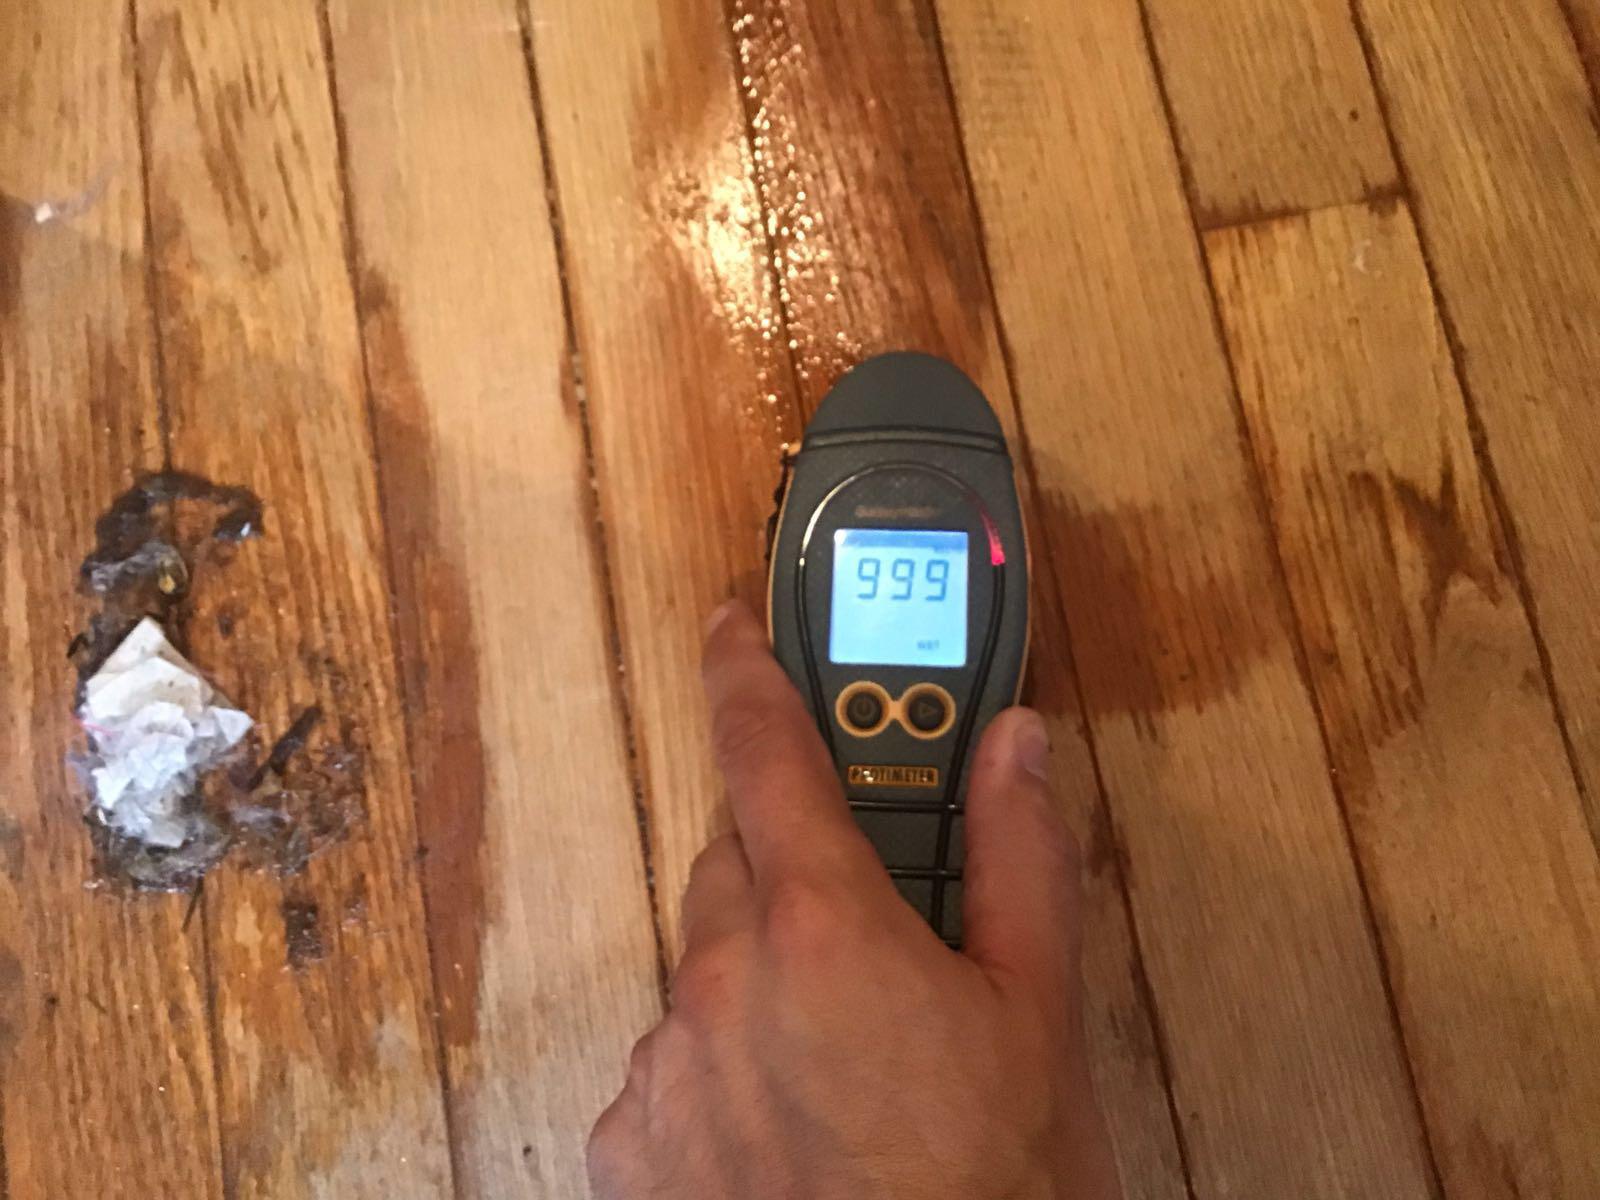 Moisture meters are an important tool when performing water restoration services.